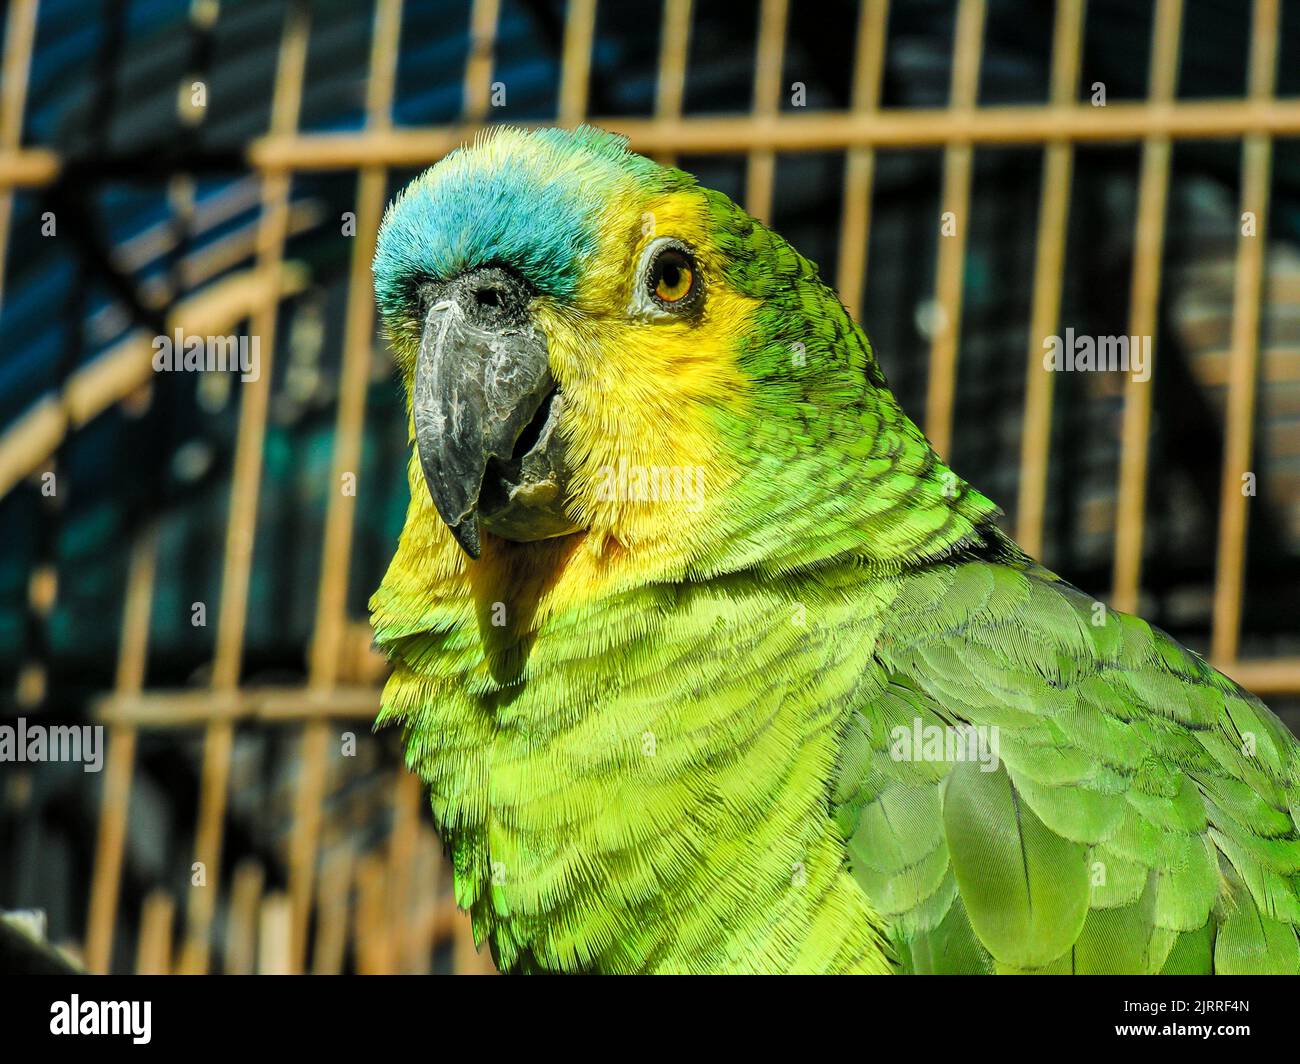 Green Parrot with cage in the background in Brazil Stock Photo